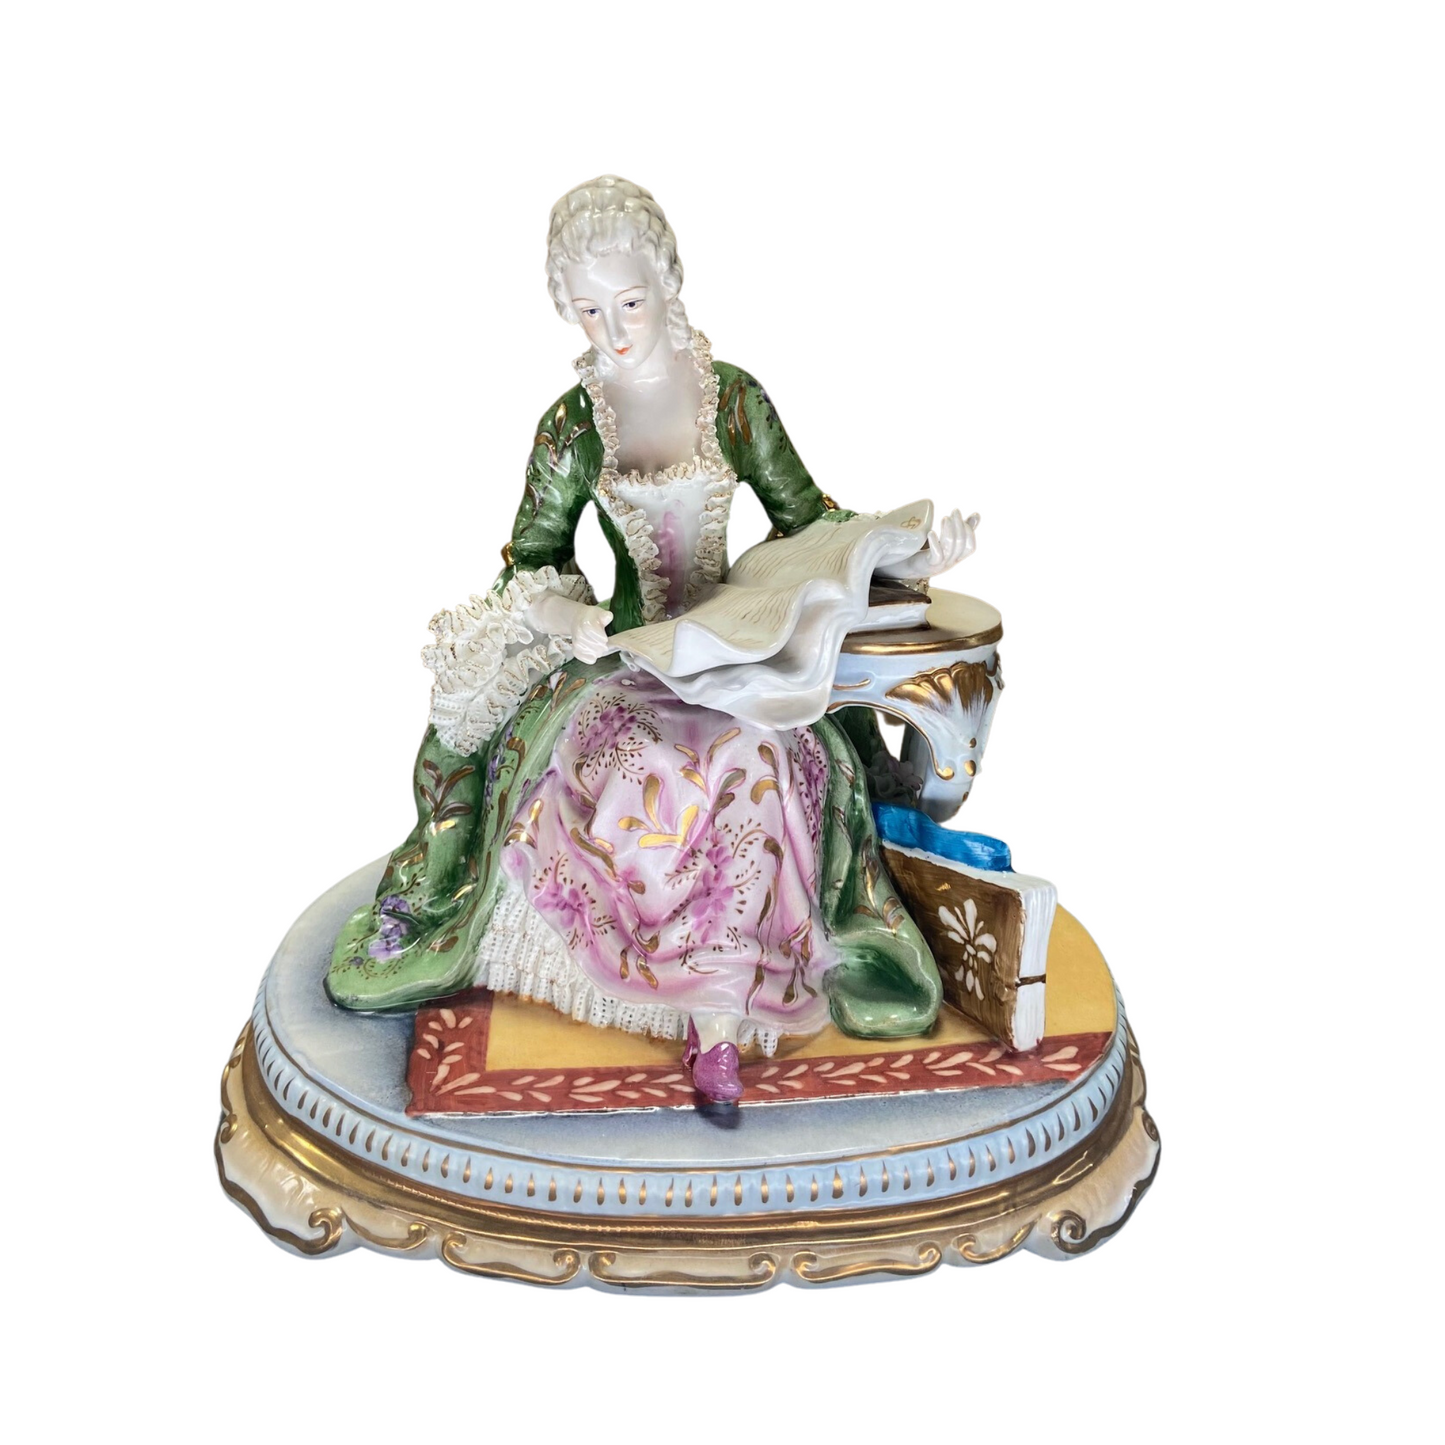 Hand-painted Net Lace Porcelain Reading Lady Figurine